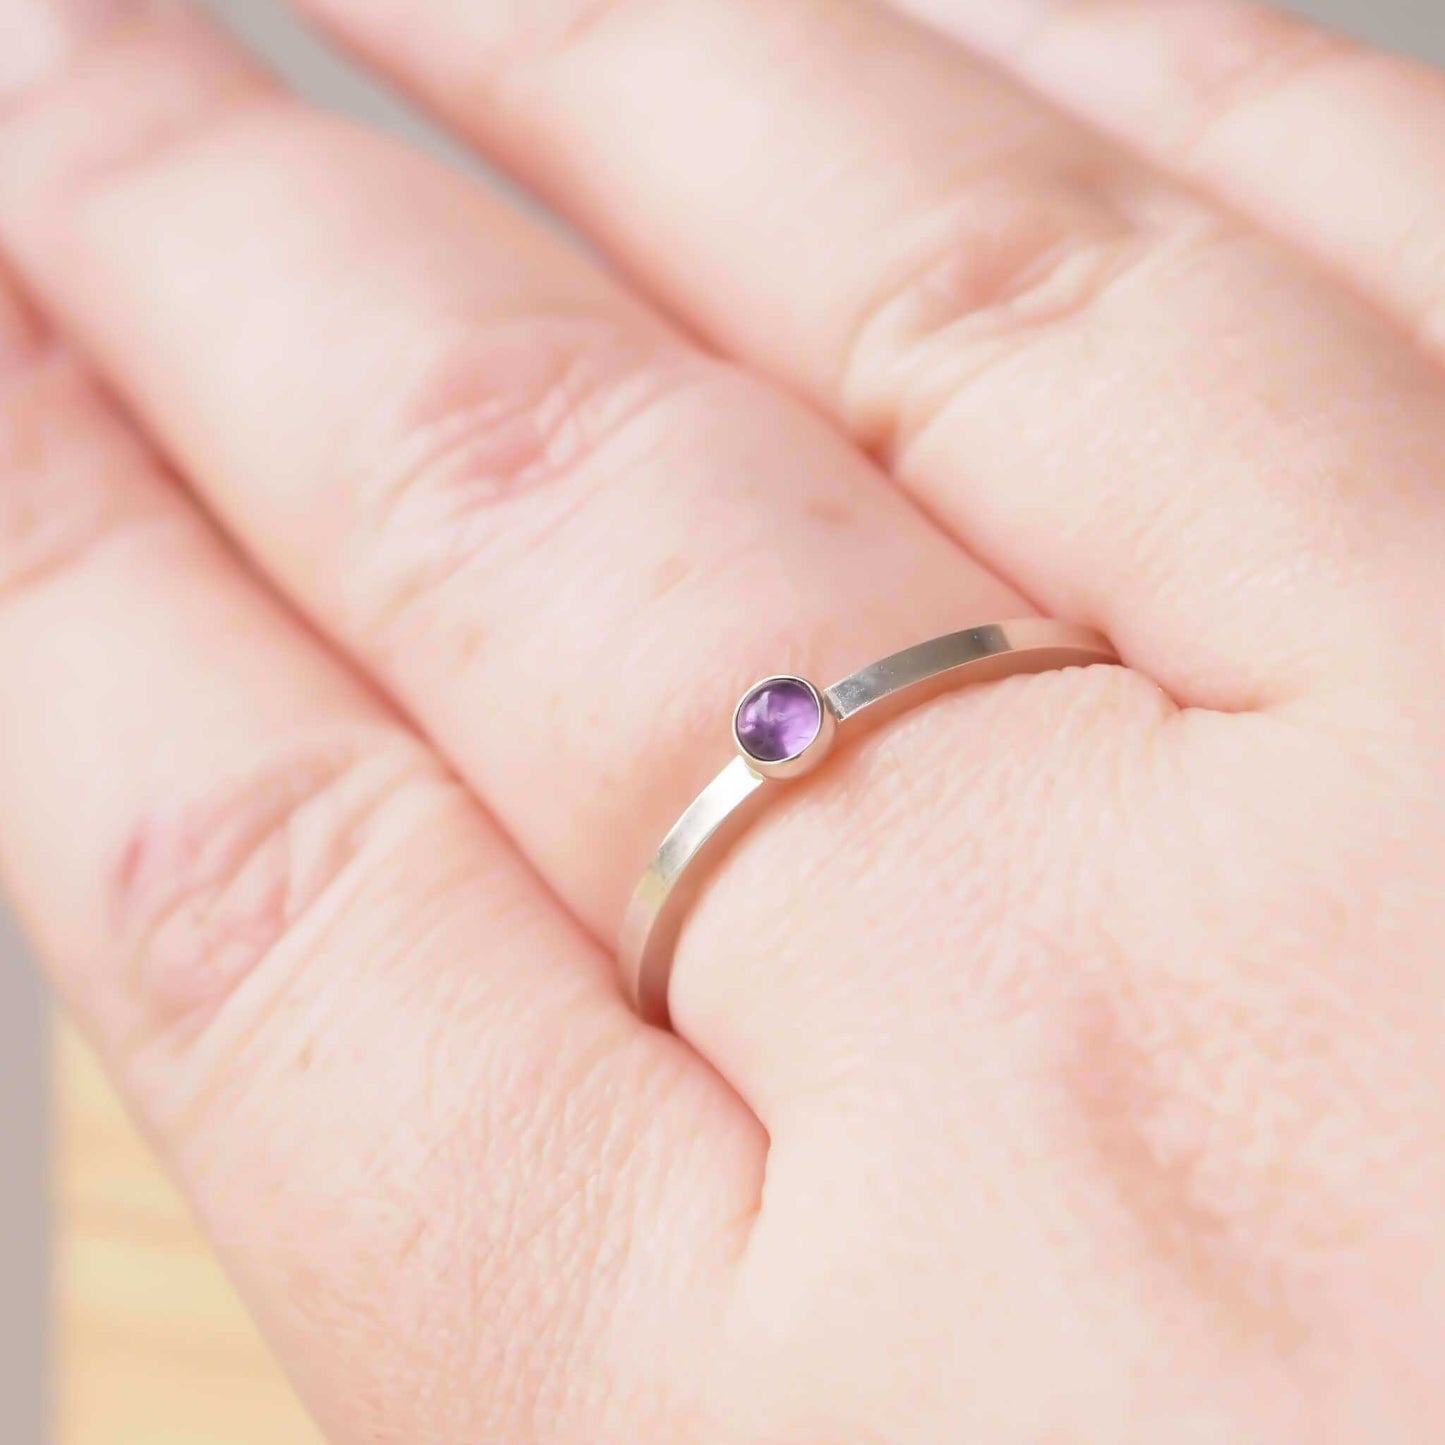 Amethyst and Sterling Silver Ring made from a small 3mm round deep purple Amethyst gemstone set simply onto a modern band of square wire. Handmade to your ring size by maram jewellery in Scotland